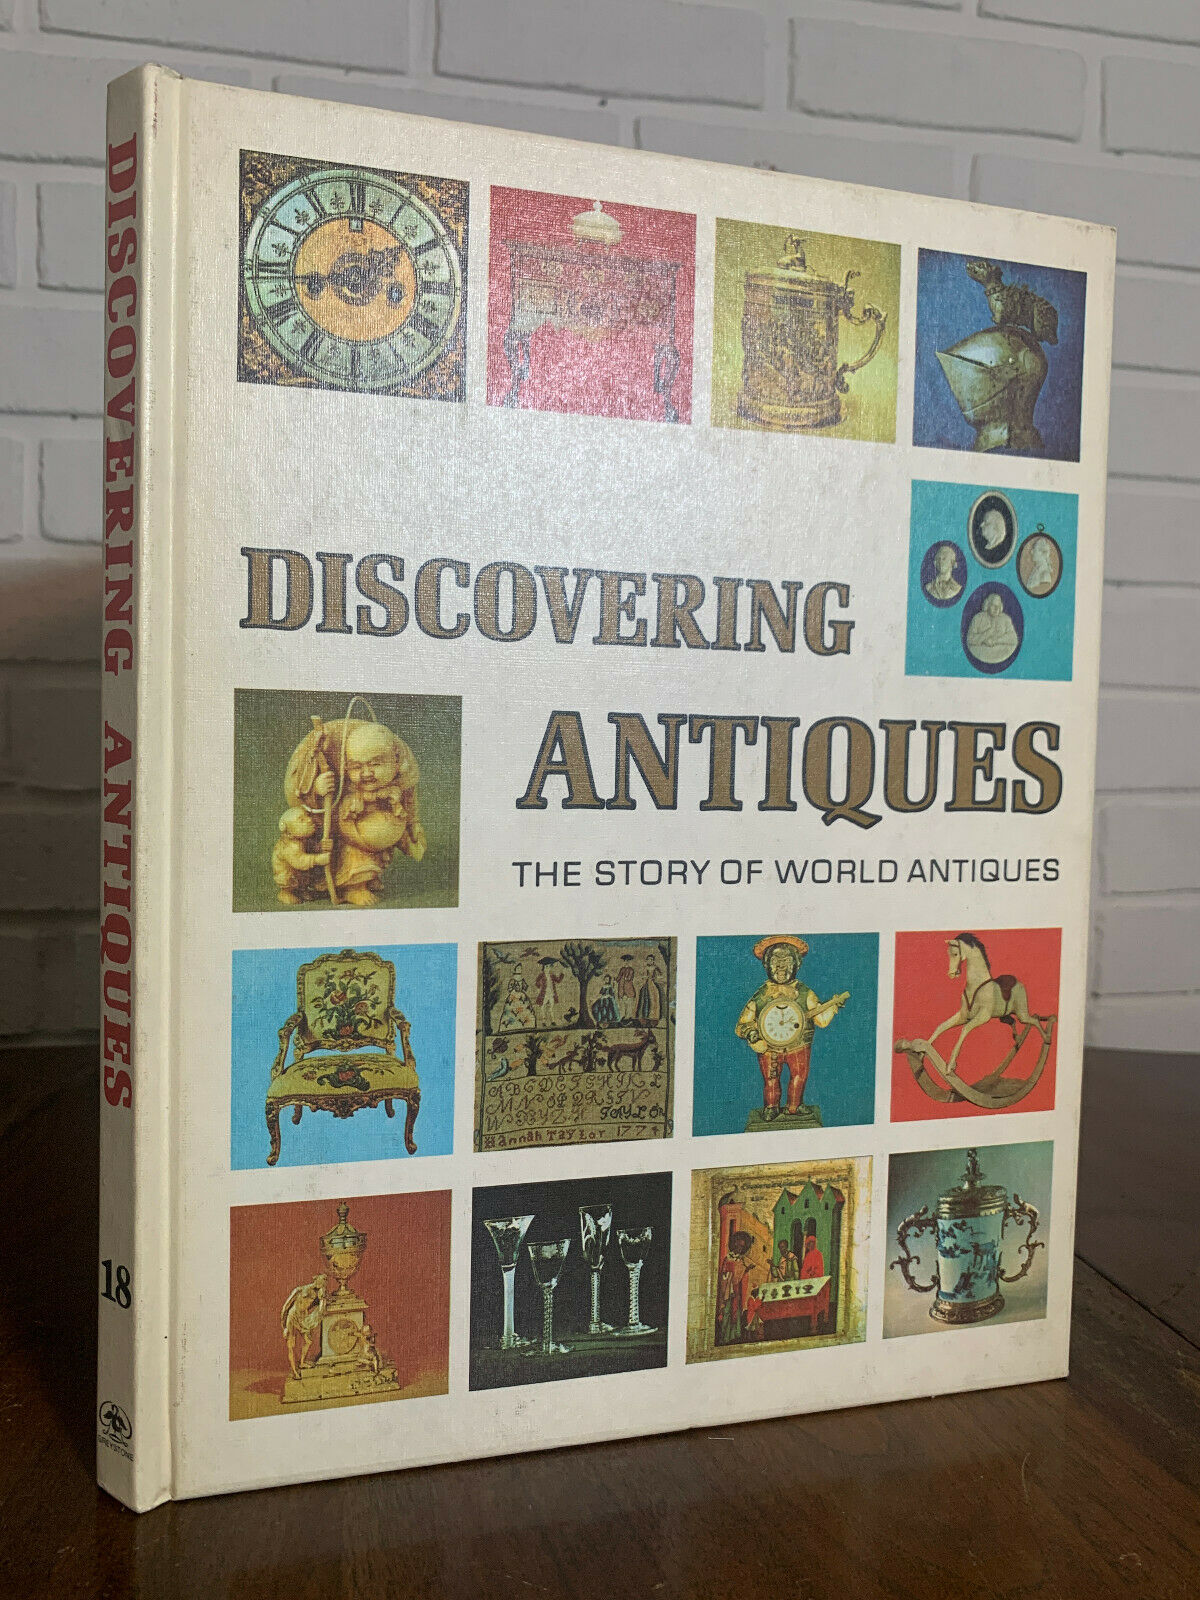 Discovering Antiques The Story of World Antiques Volume 18 (1972-1973)